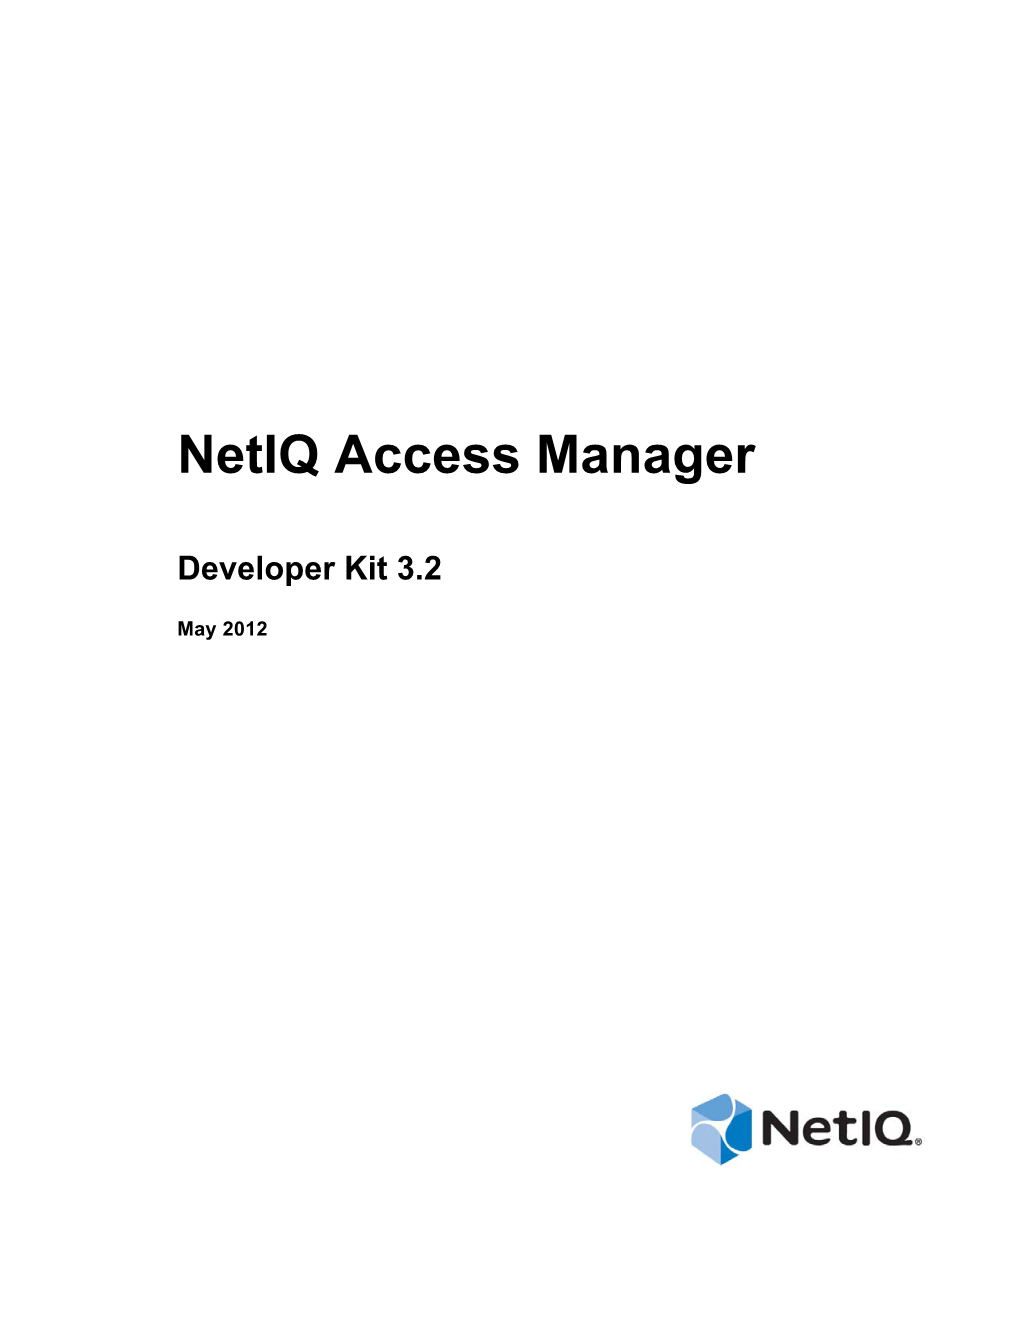 Netiq Access Manager 3.2 Developer Kit About This Guide